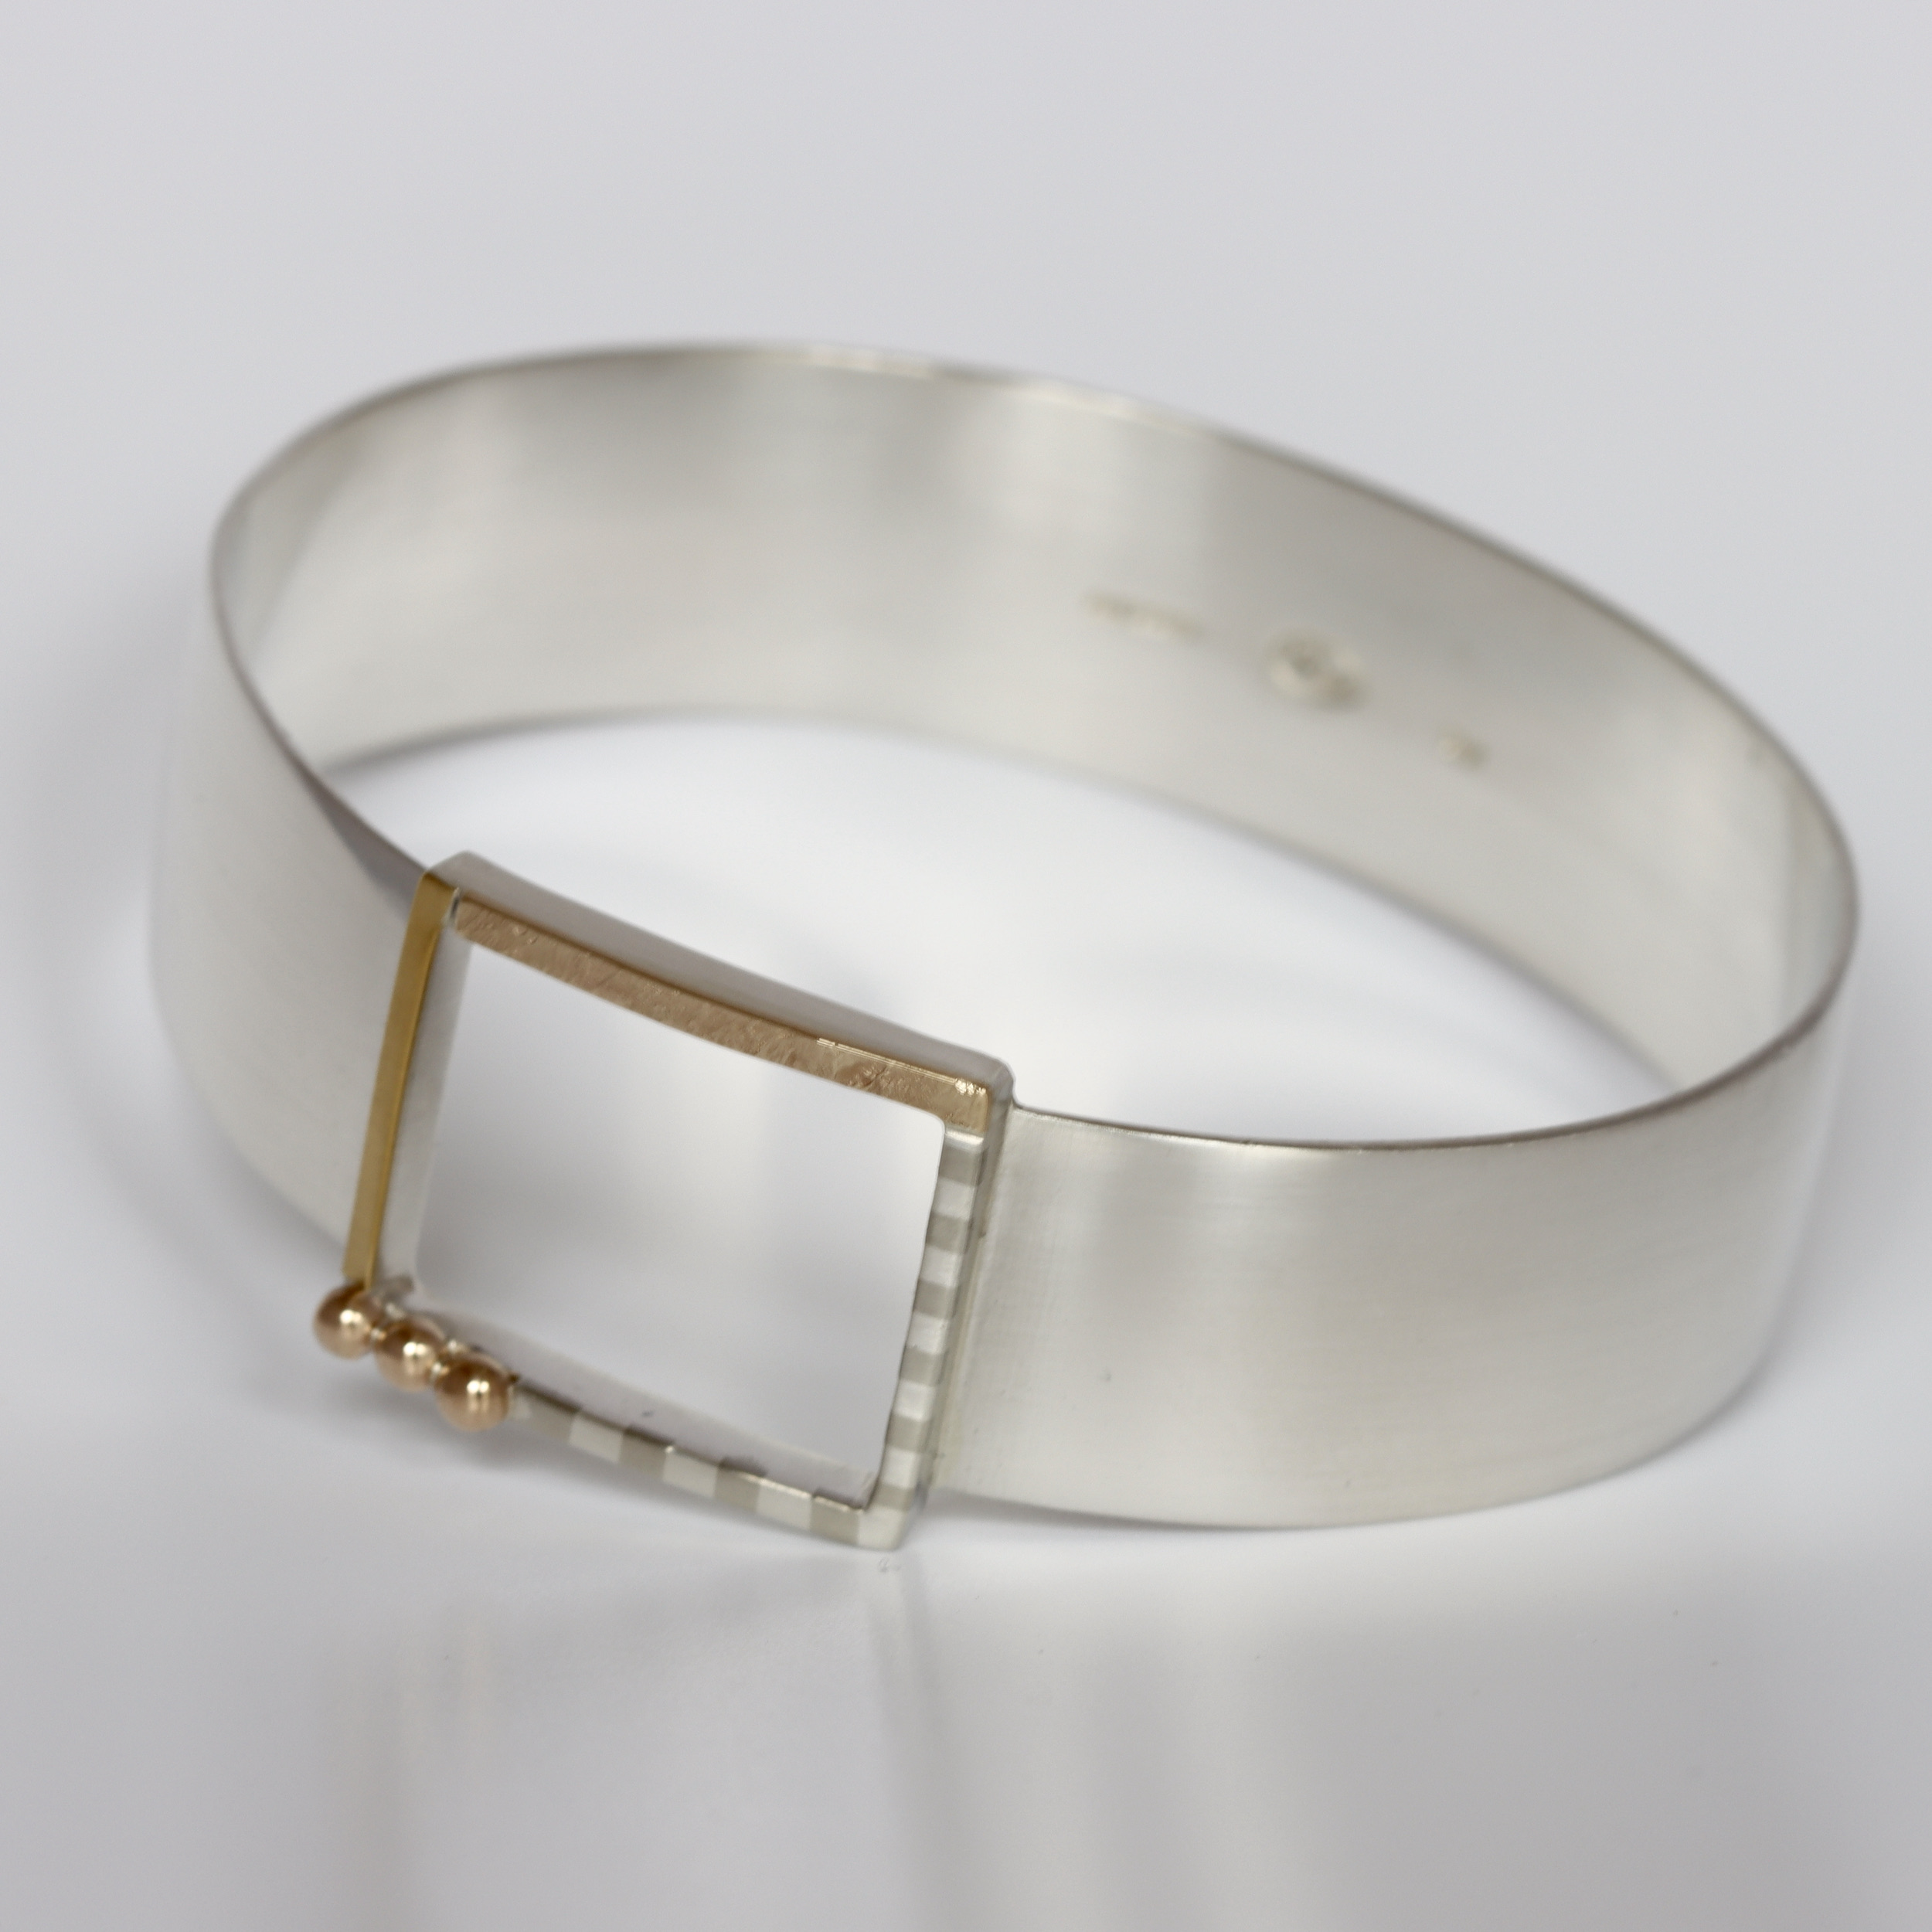 Hammered Silver Bangle 001-655-00016 - $500 or Less | Joint Venture Jewelry  | Cary, NC